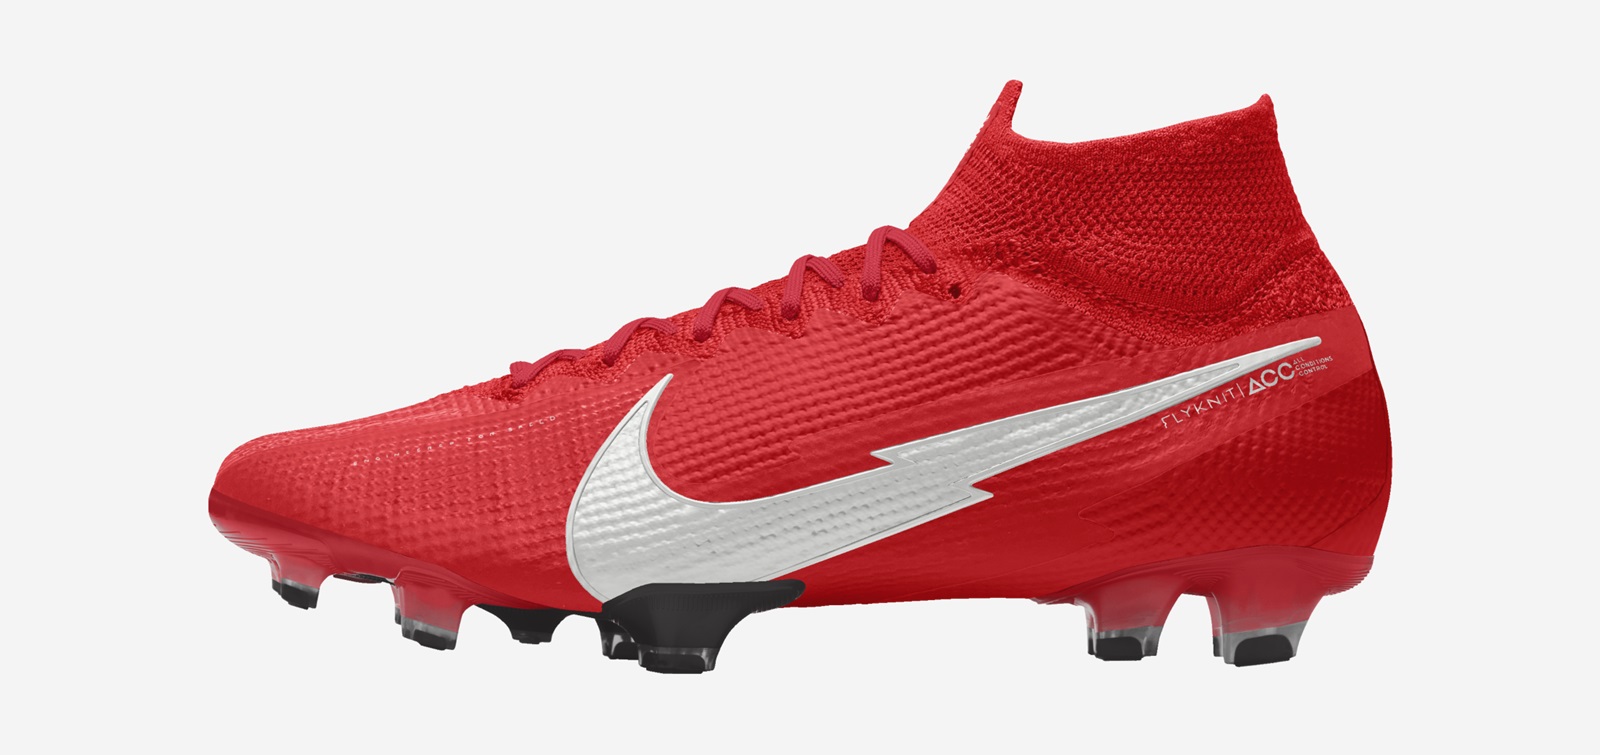 Nike Mercurial Superfly VII Football Boots